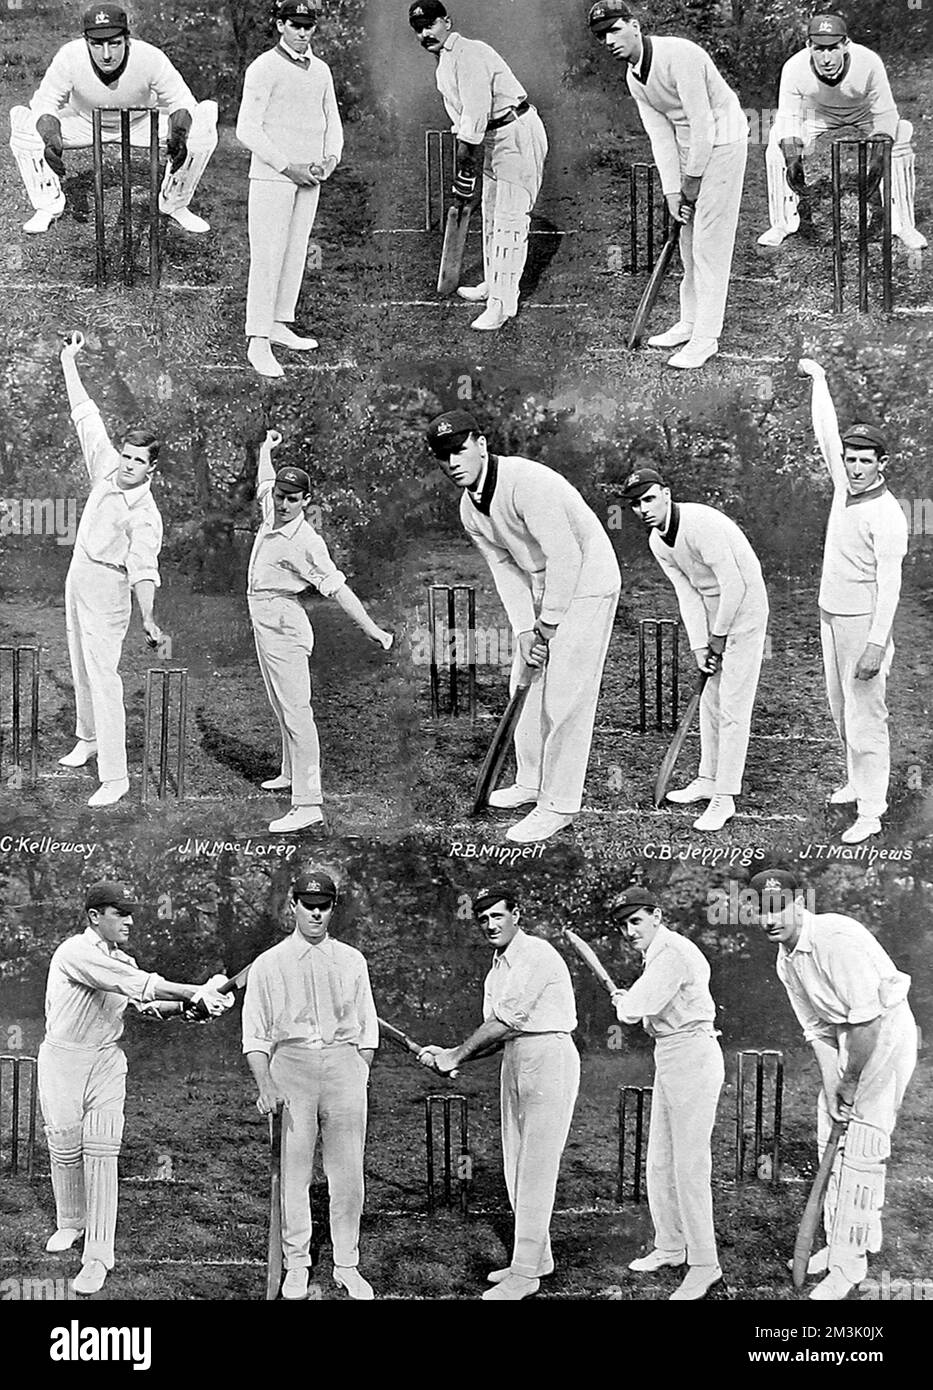 Montage of the Australian Cricket Team which toured England in the summer of 1912. This tour was unusual in that no test matches were played, the Australians only playing county sides.  Top row, left to right: H. Webster, W. Whitty, S.E. Gregory (captain), E.R. Mayne, W. Carkeek.  Middle row, left to right: C. Kelleway, J.W. MacLaren, R.B. Minnett, C.B. Jennings, J.T. Matthews.  Bottom row, left to right: C.G. Macartney, W. Bardsley, D. Smith, G.R. Hazlitt, S.H. Emery.  1912 Stock Photo